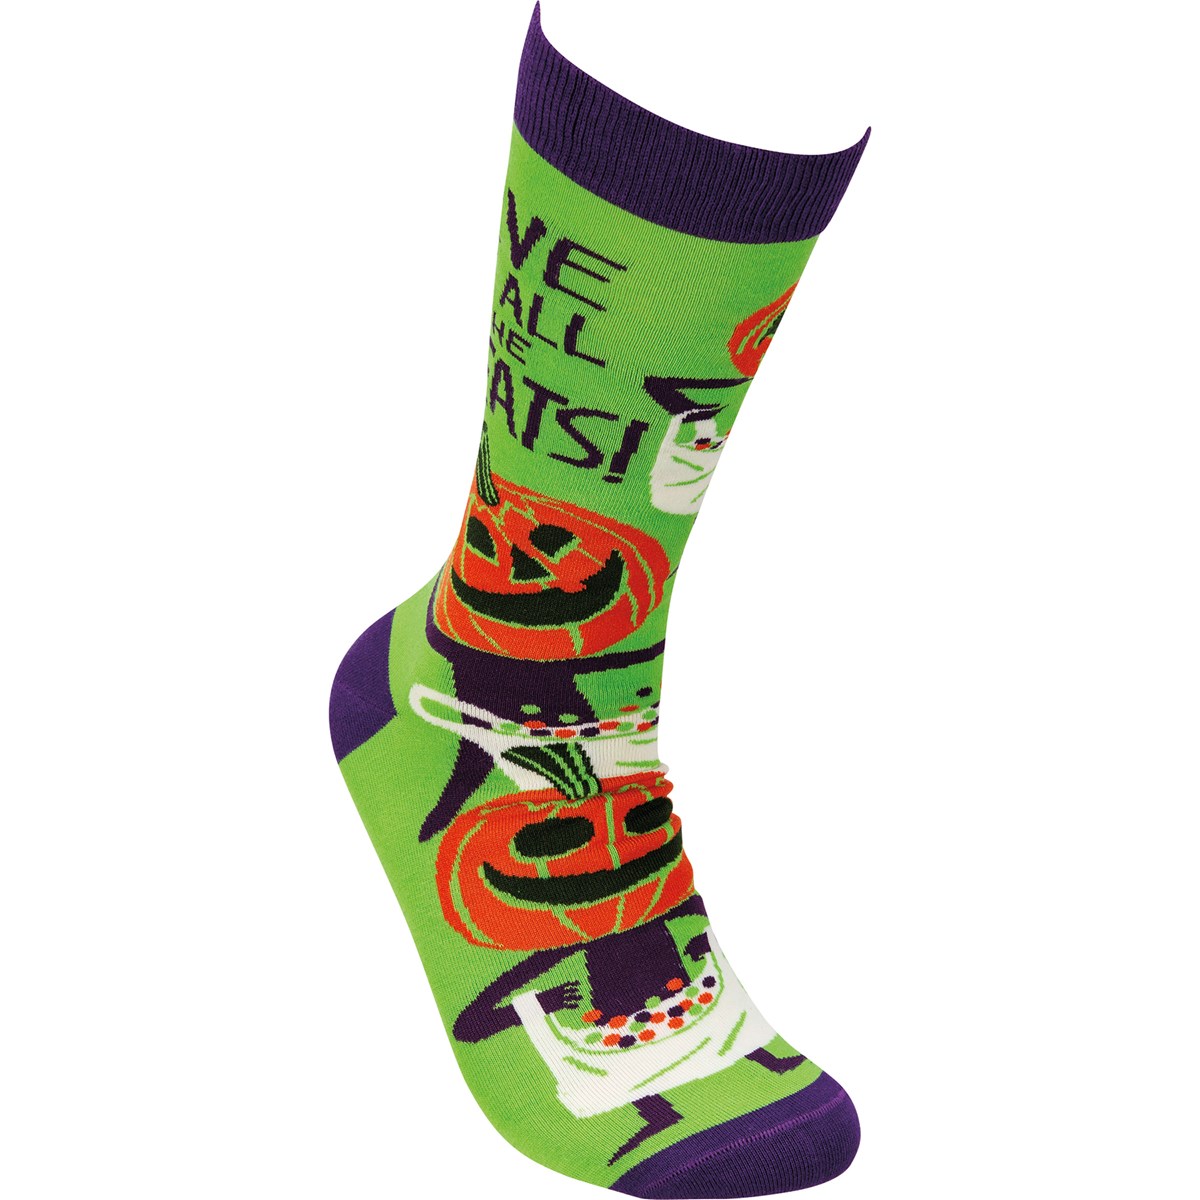 Socks - Give Me All The Treats - One Size Fits Most - Cotton, Nylon, Spandex